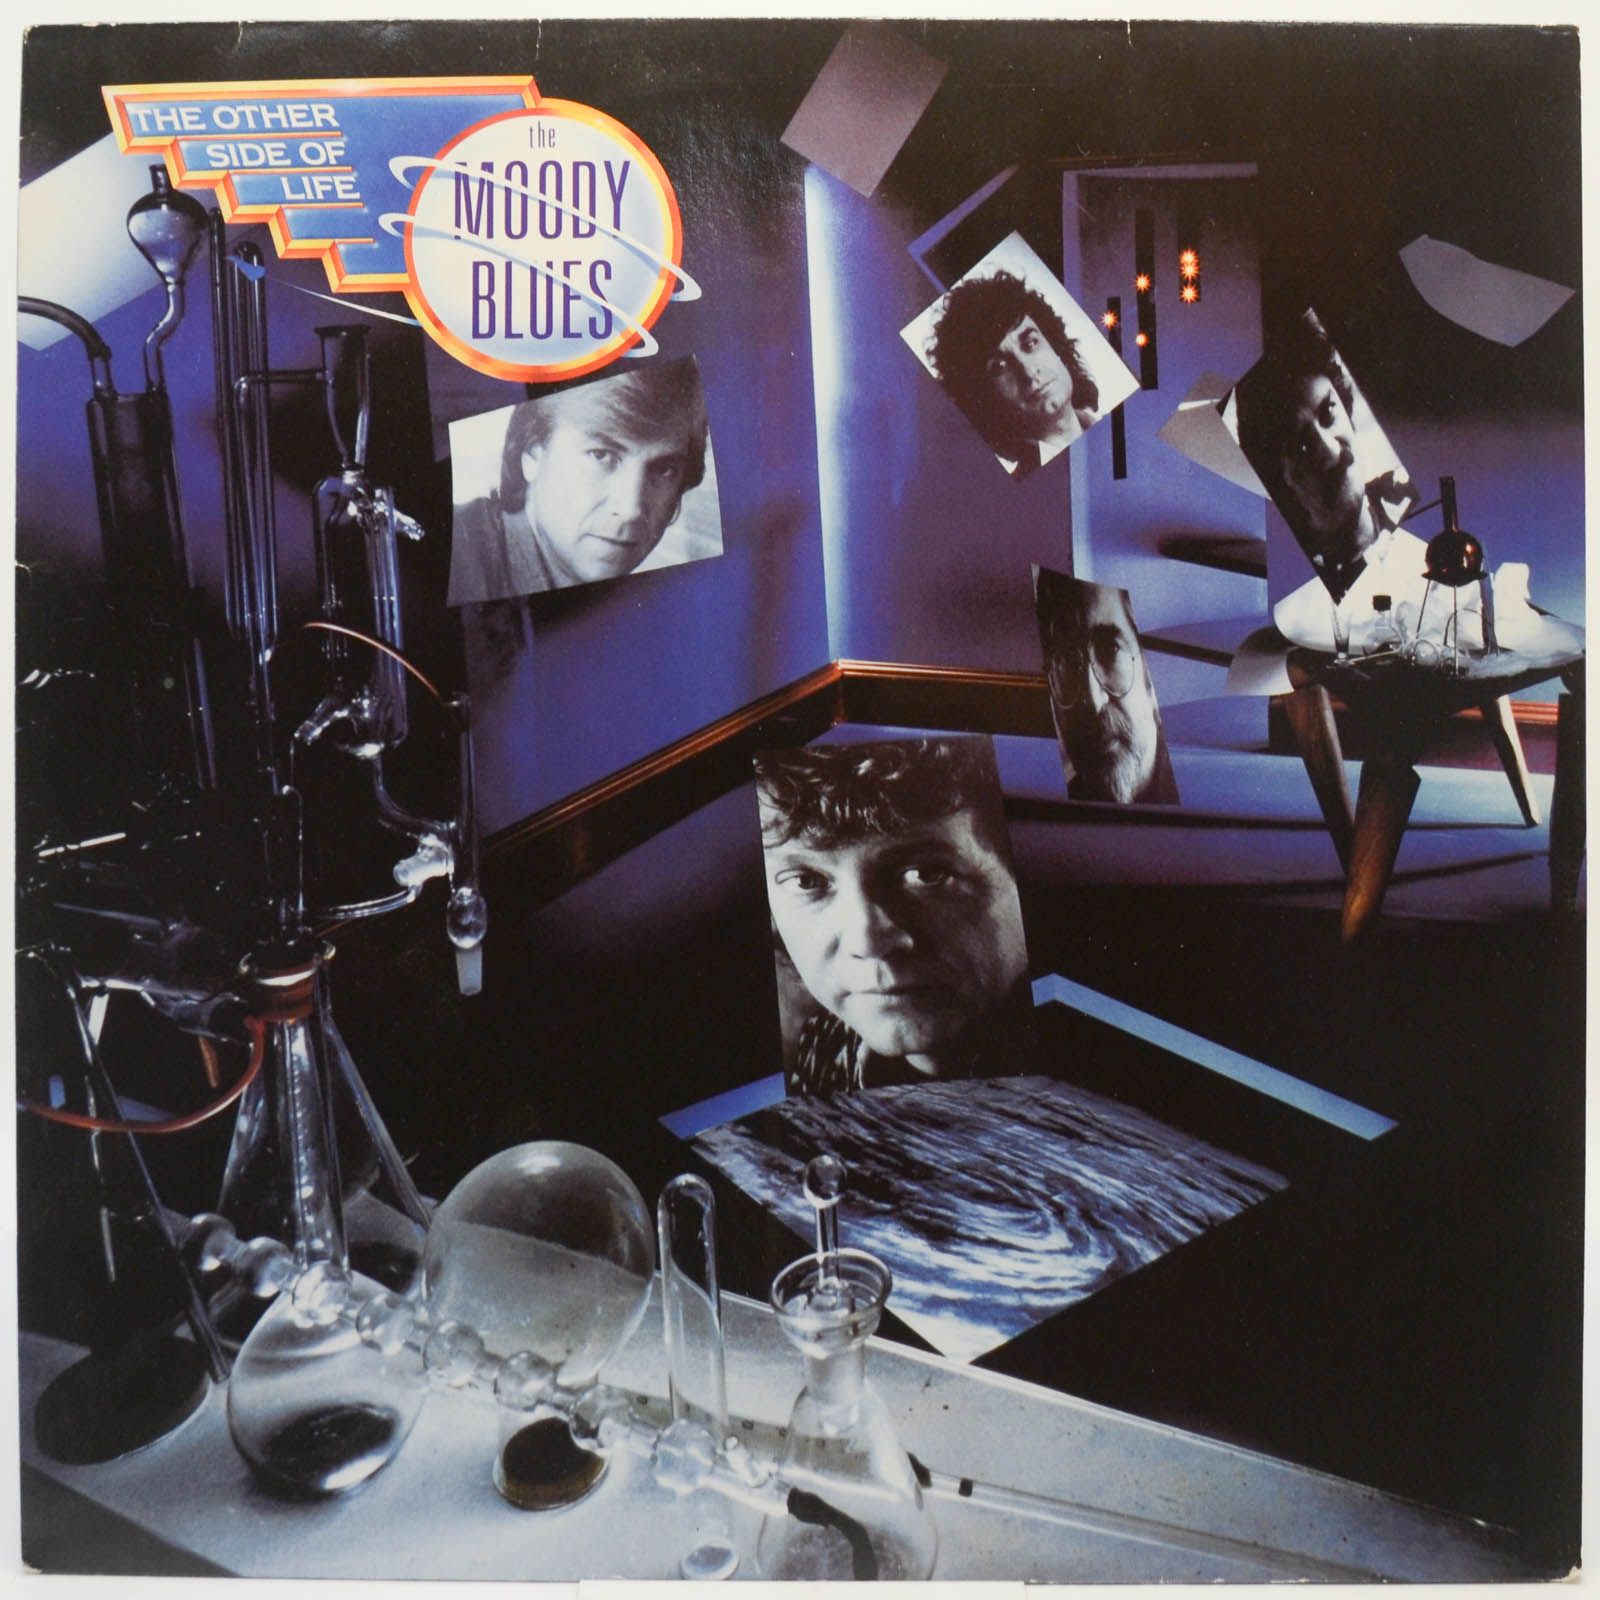 Moody Blues — The Other Side Of Life, 1986